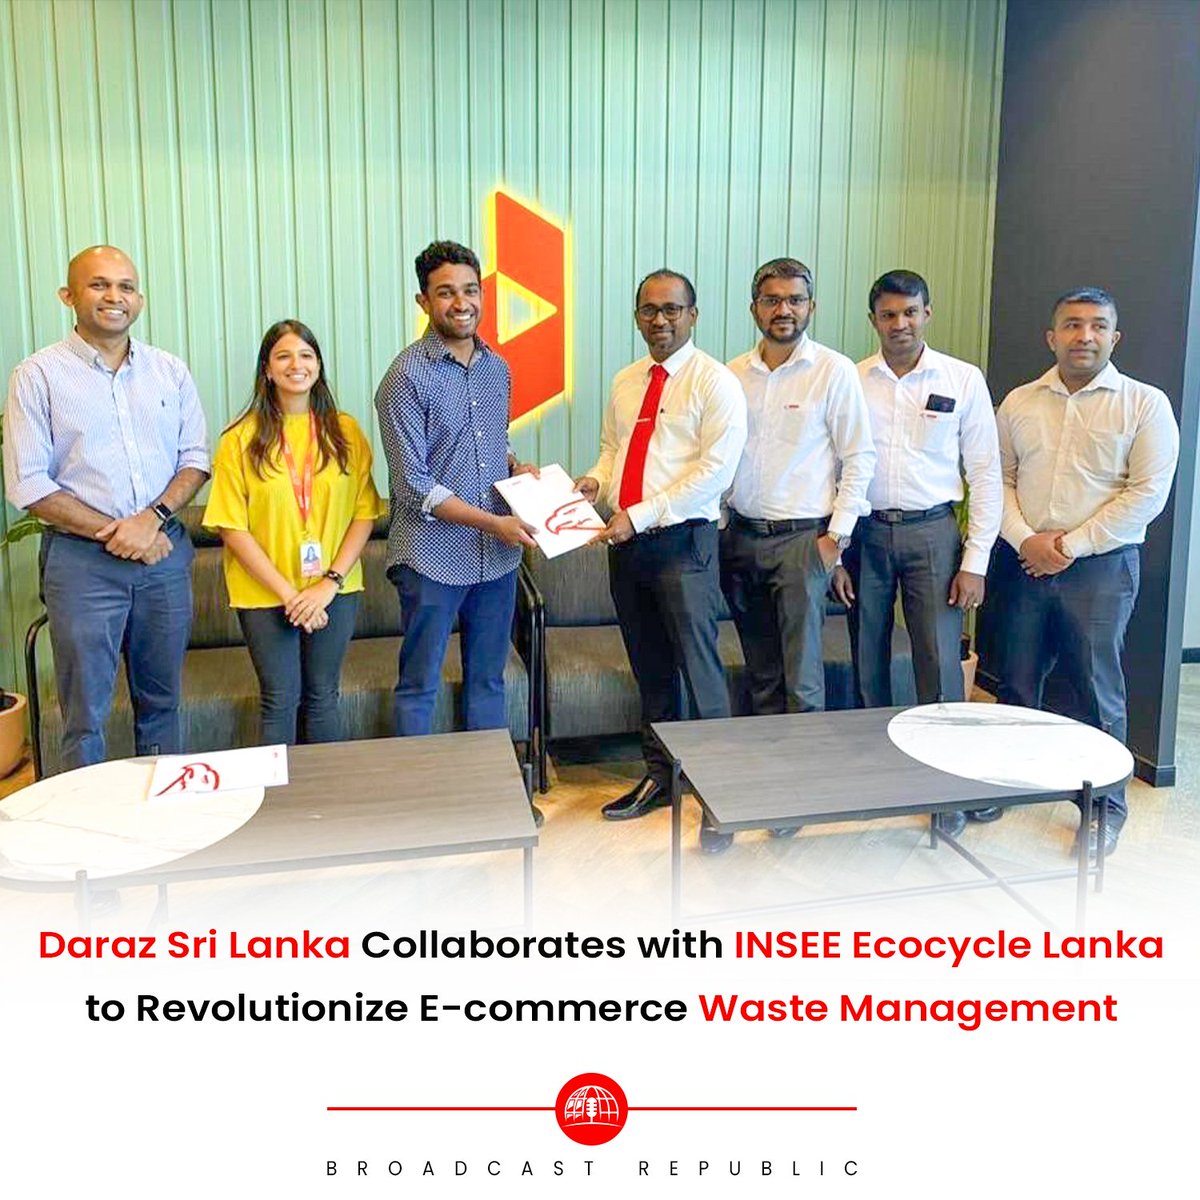 Daraz Sri Lanka, a prominent e-commerce marketplace, has joined forces with INSEE Ecocycle Lanka, a leading sustainable waste management company, to spearhead effective waste management practices within the e-commerce sector. 

#BroadcastRepublic #DarazSriLanka #INSEEEcocycle